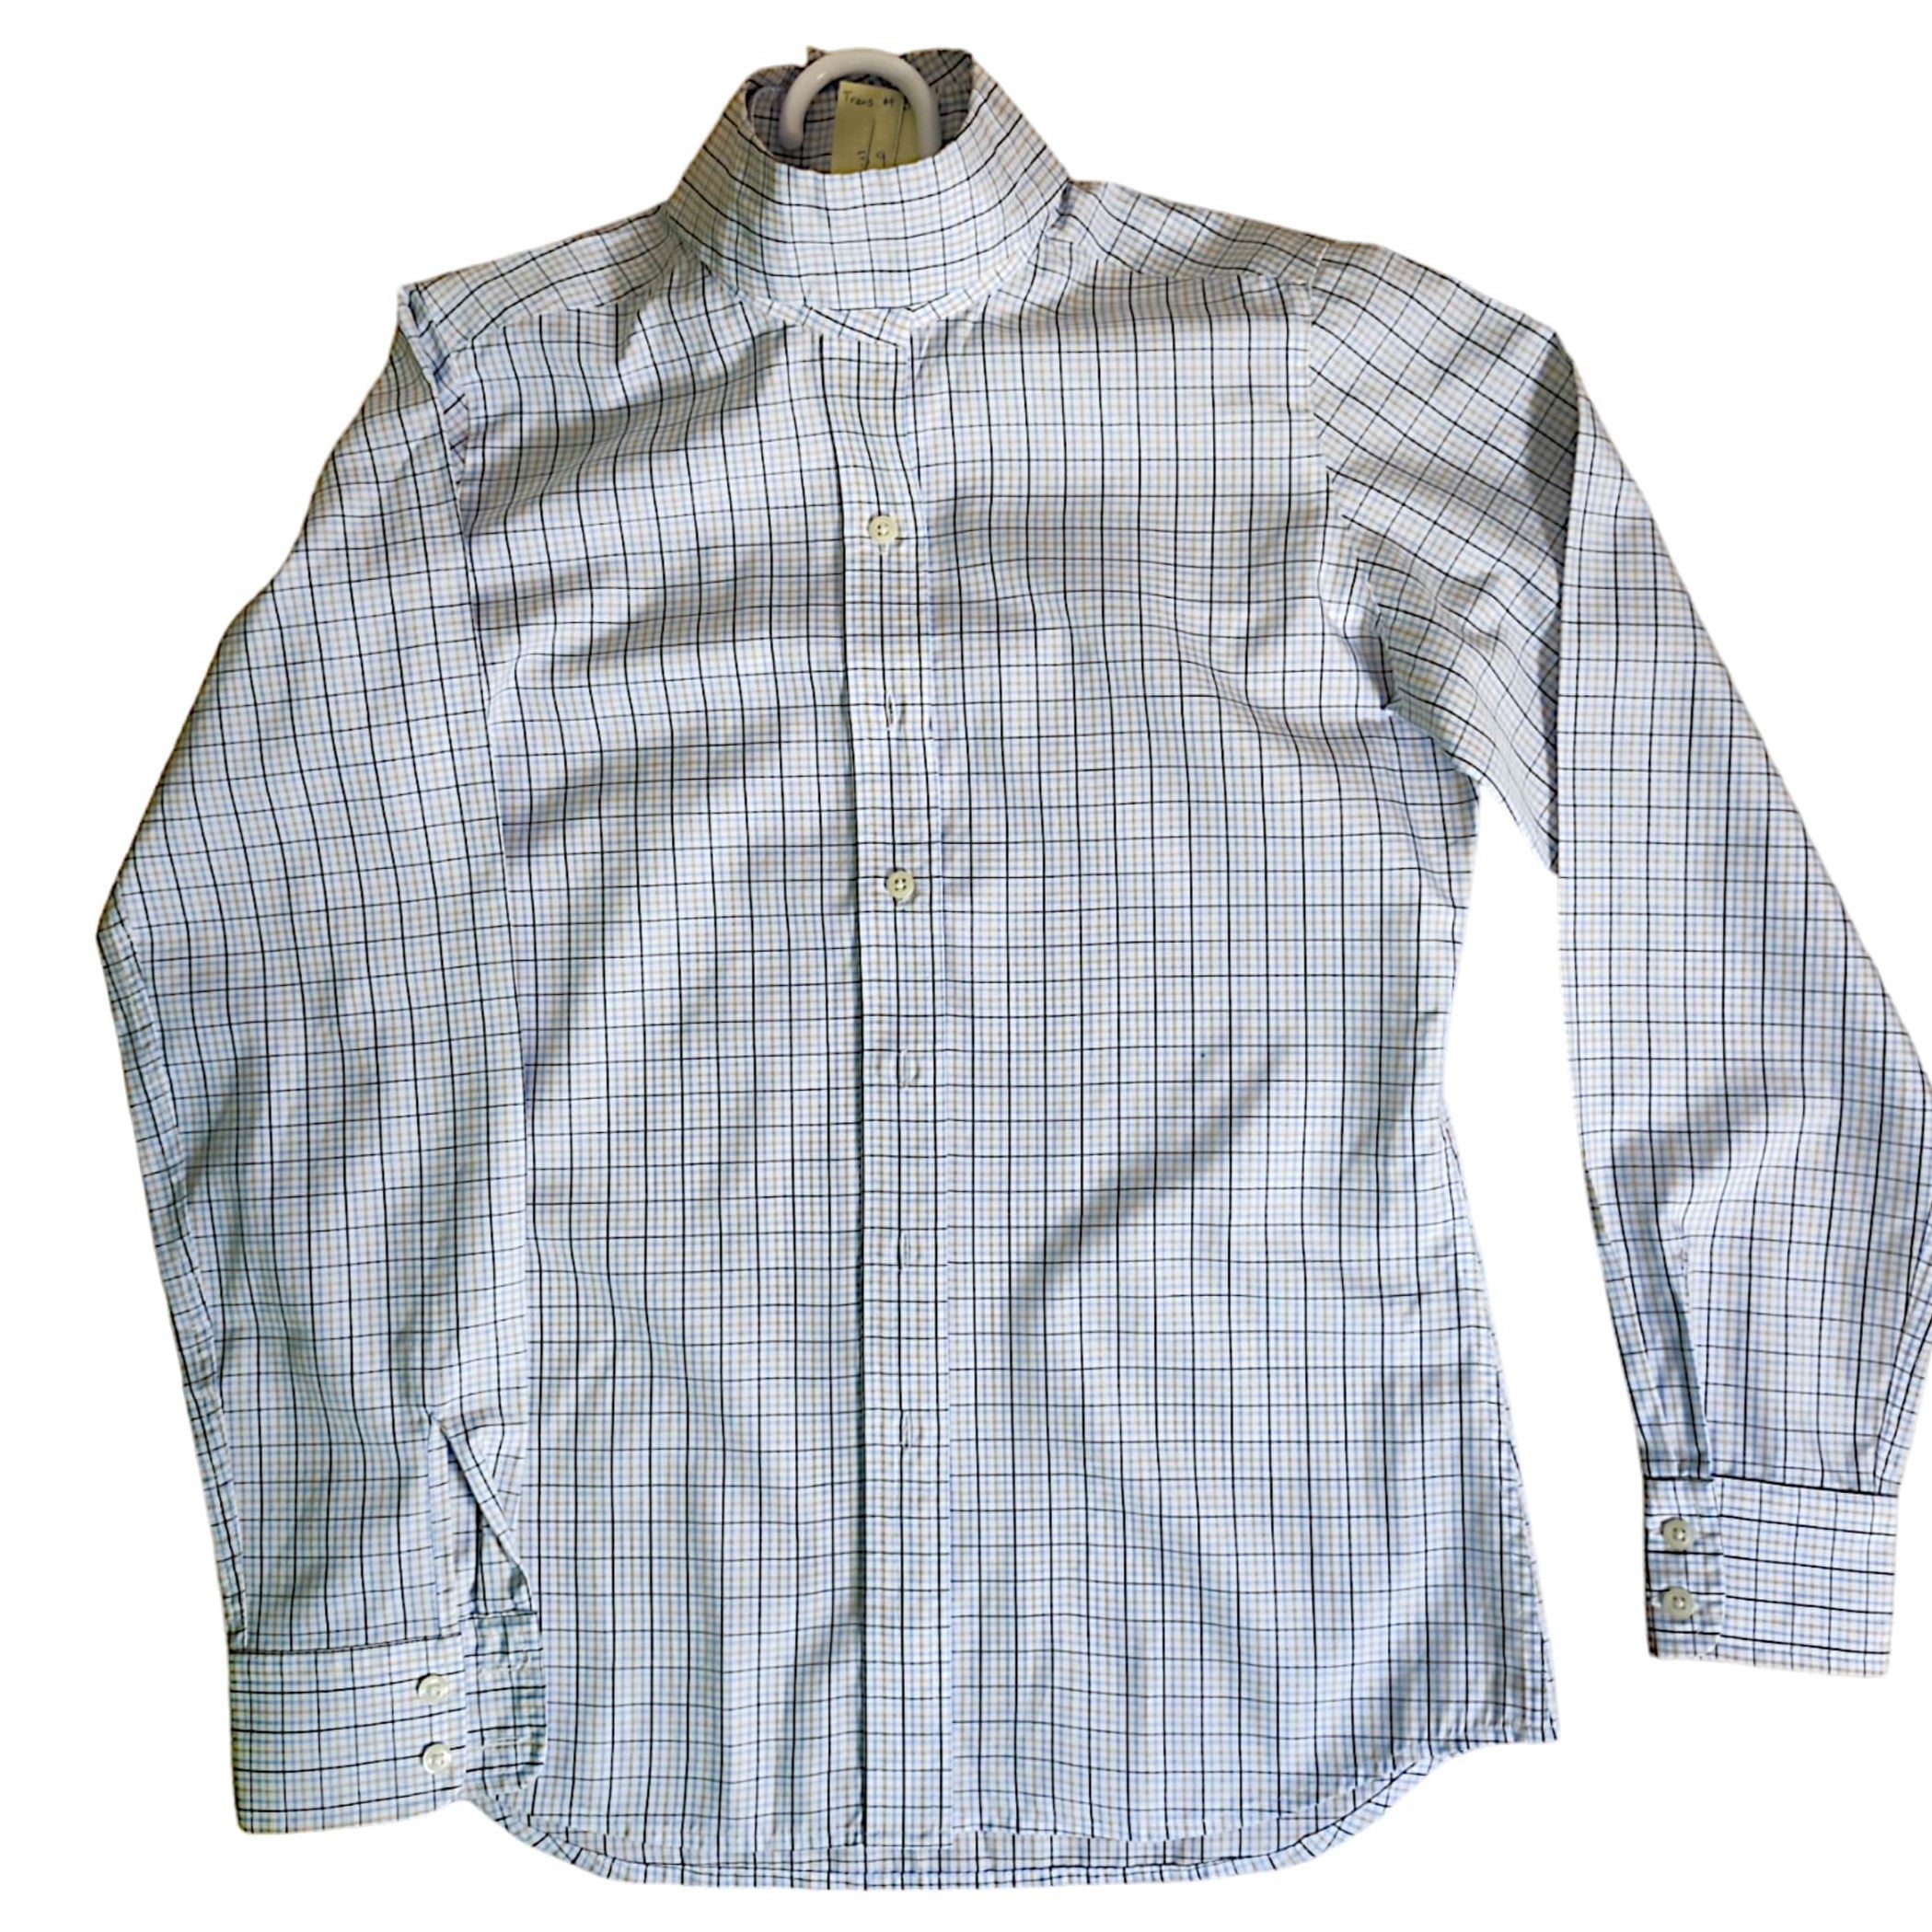 KHS EXCHANGE Tailored Sportsman Youth Show Shirt